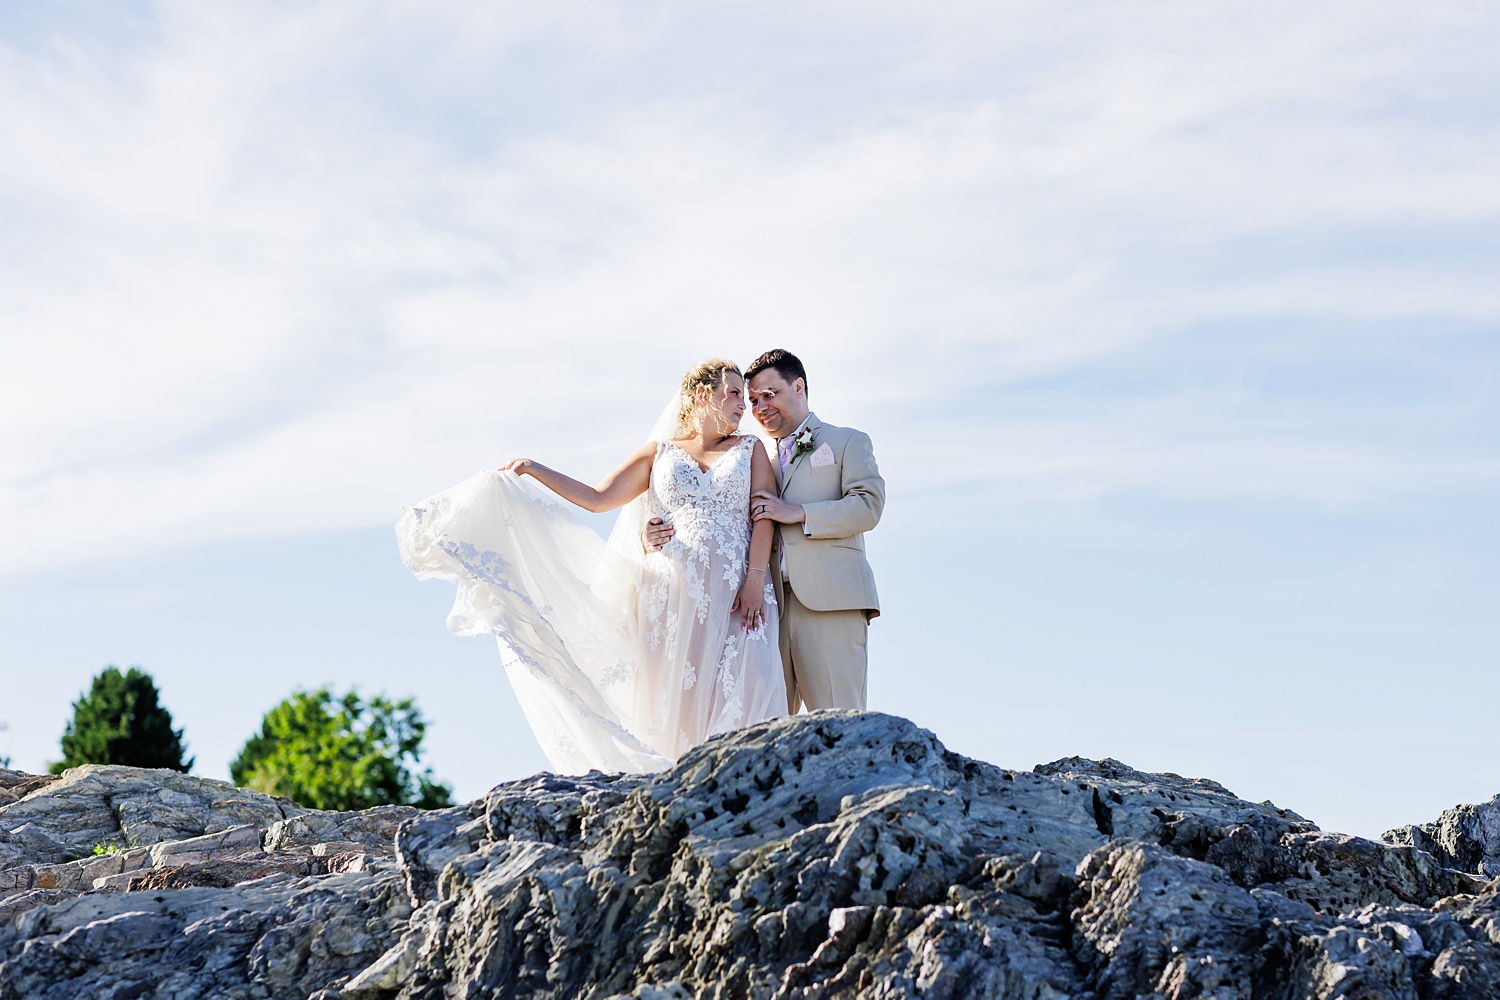 The bride and groom get close out on the rocks at Willard Beach in Maine